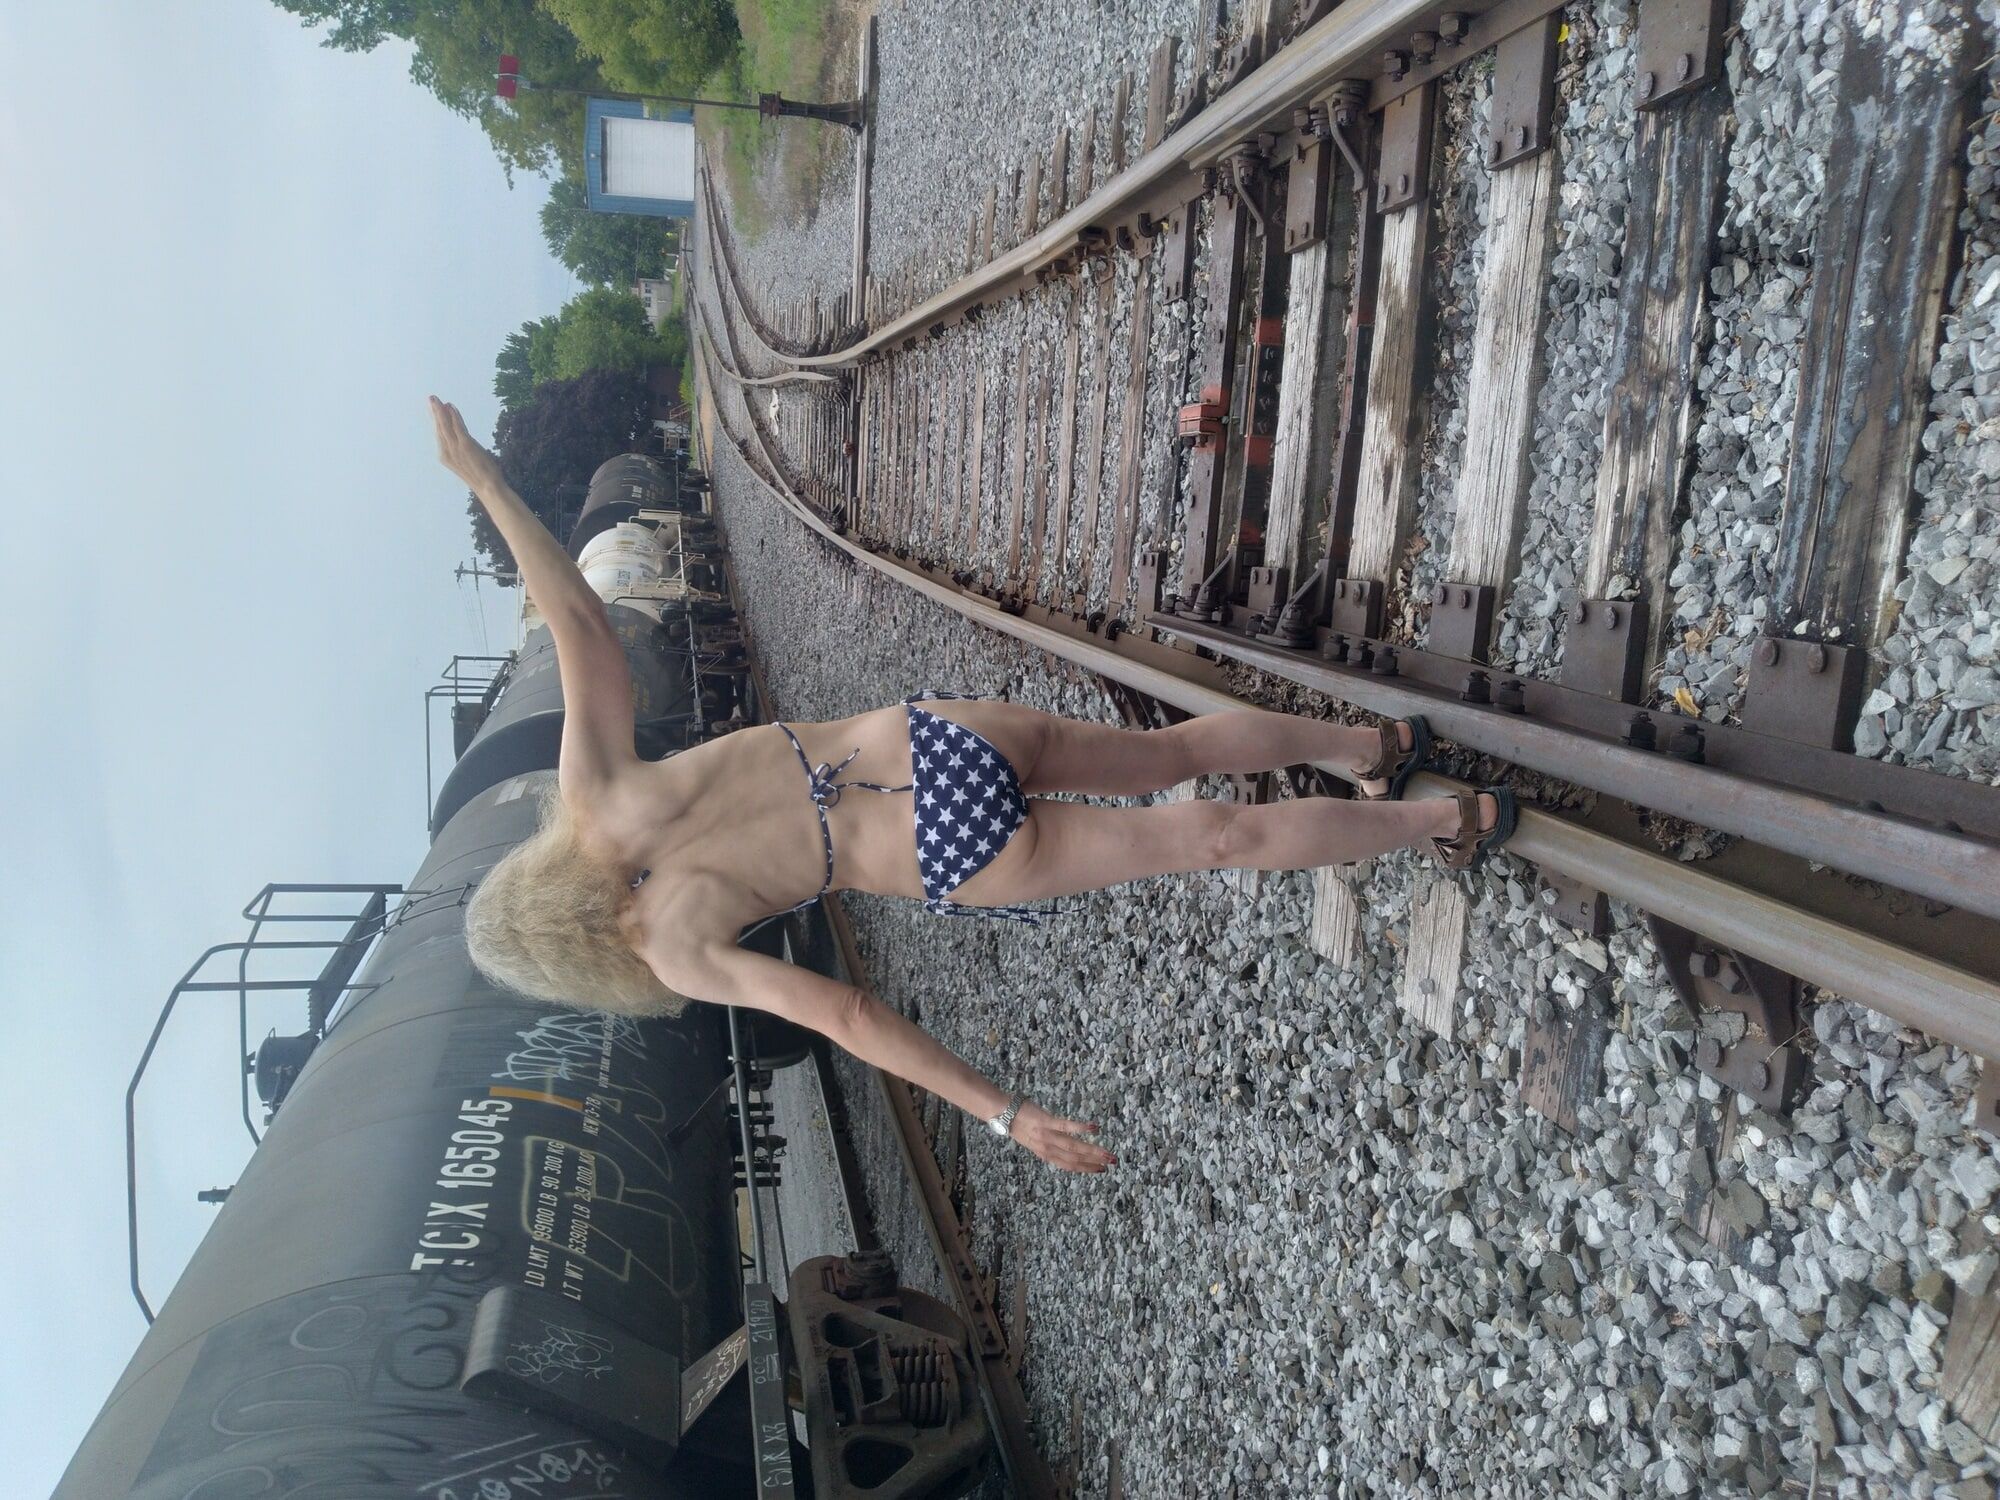 American Train. July 4th release. My best photo set to date. #42